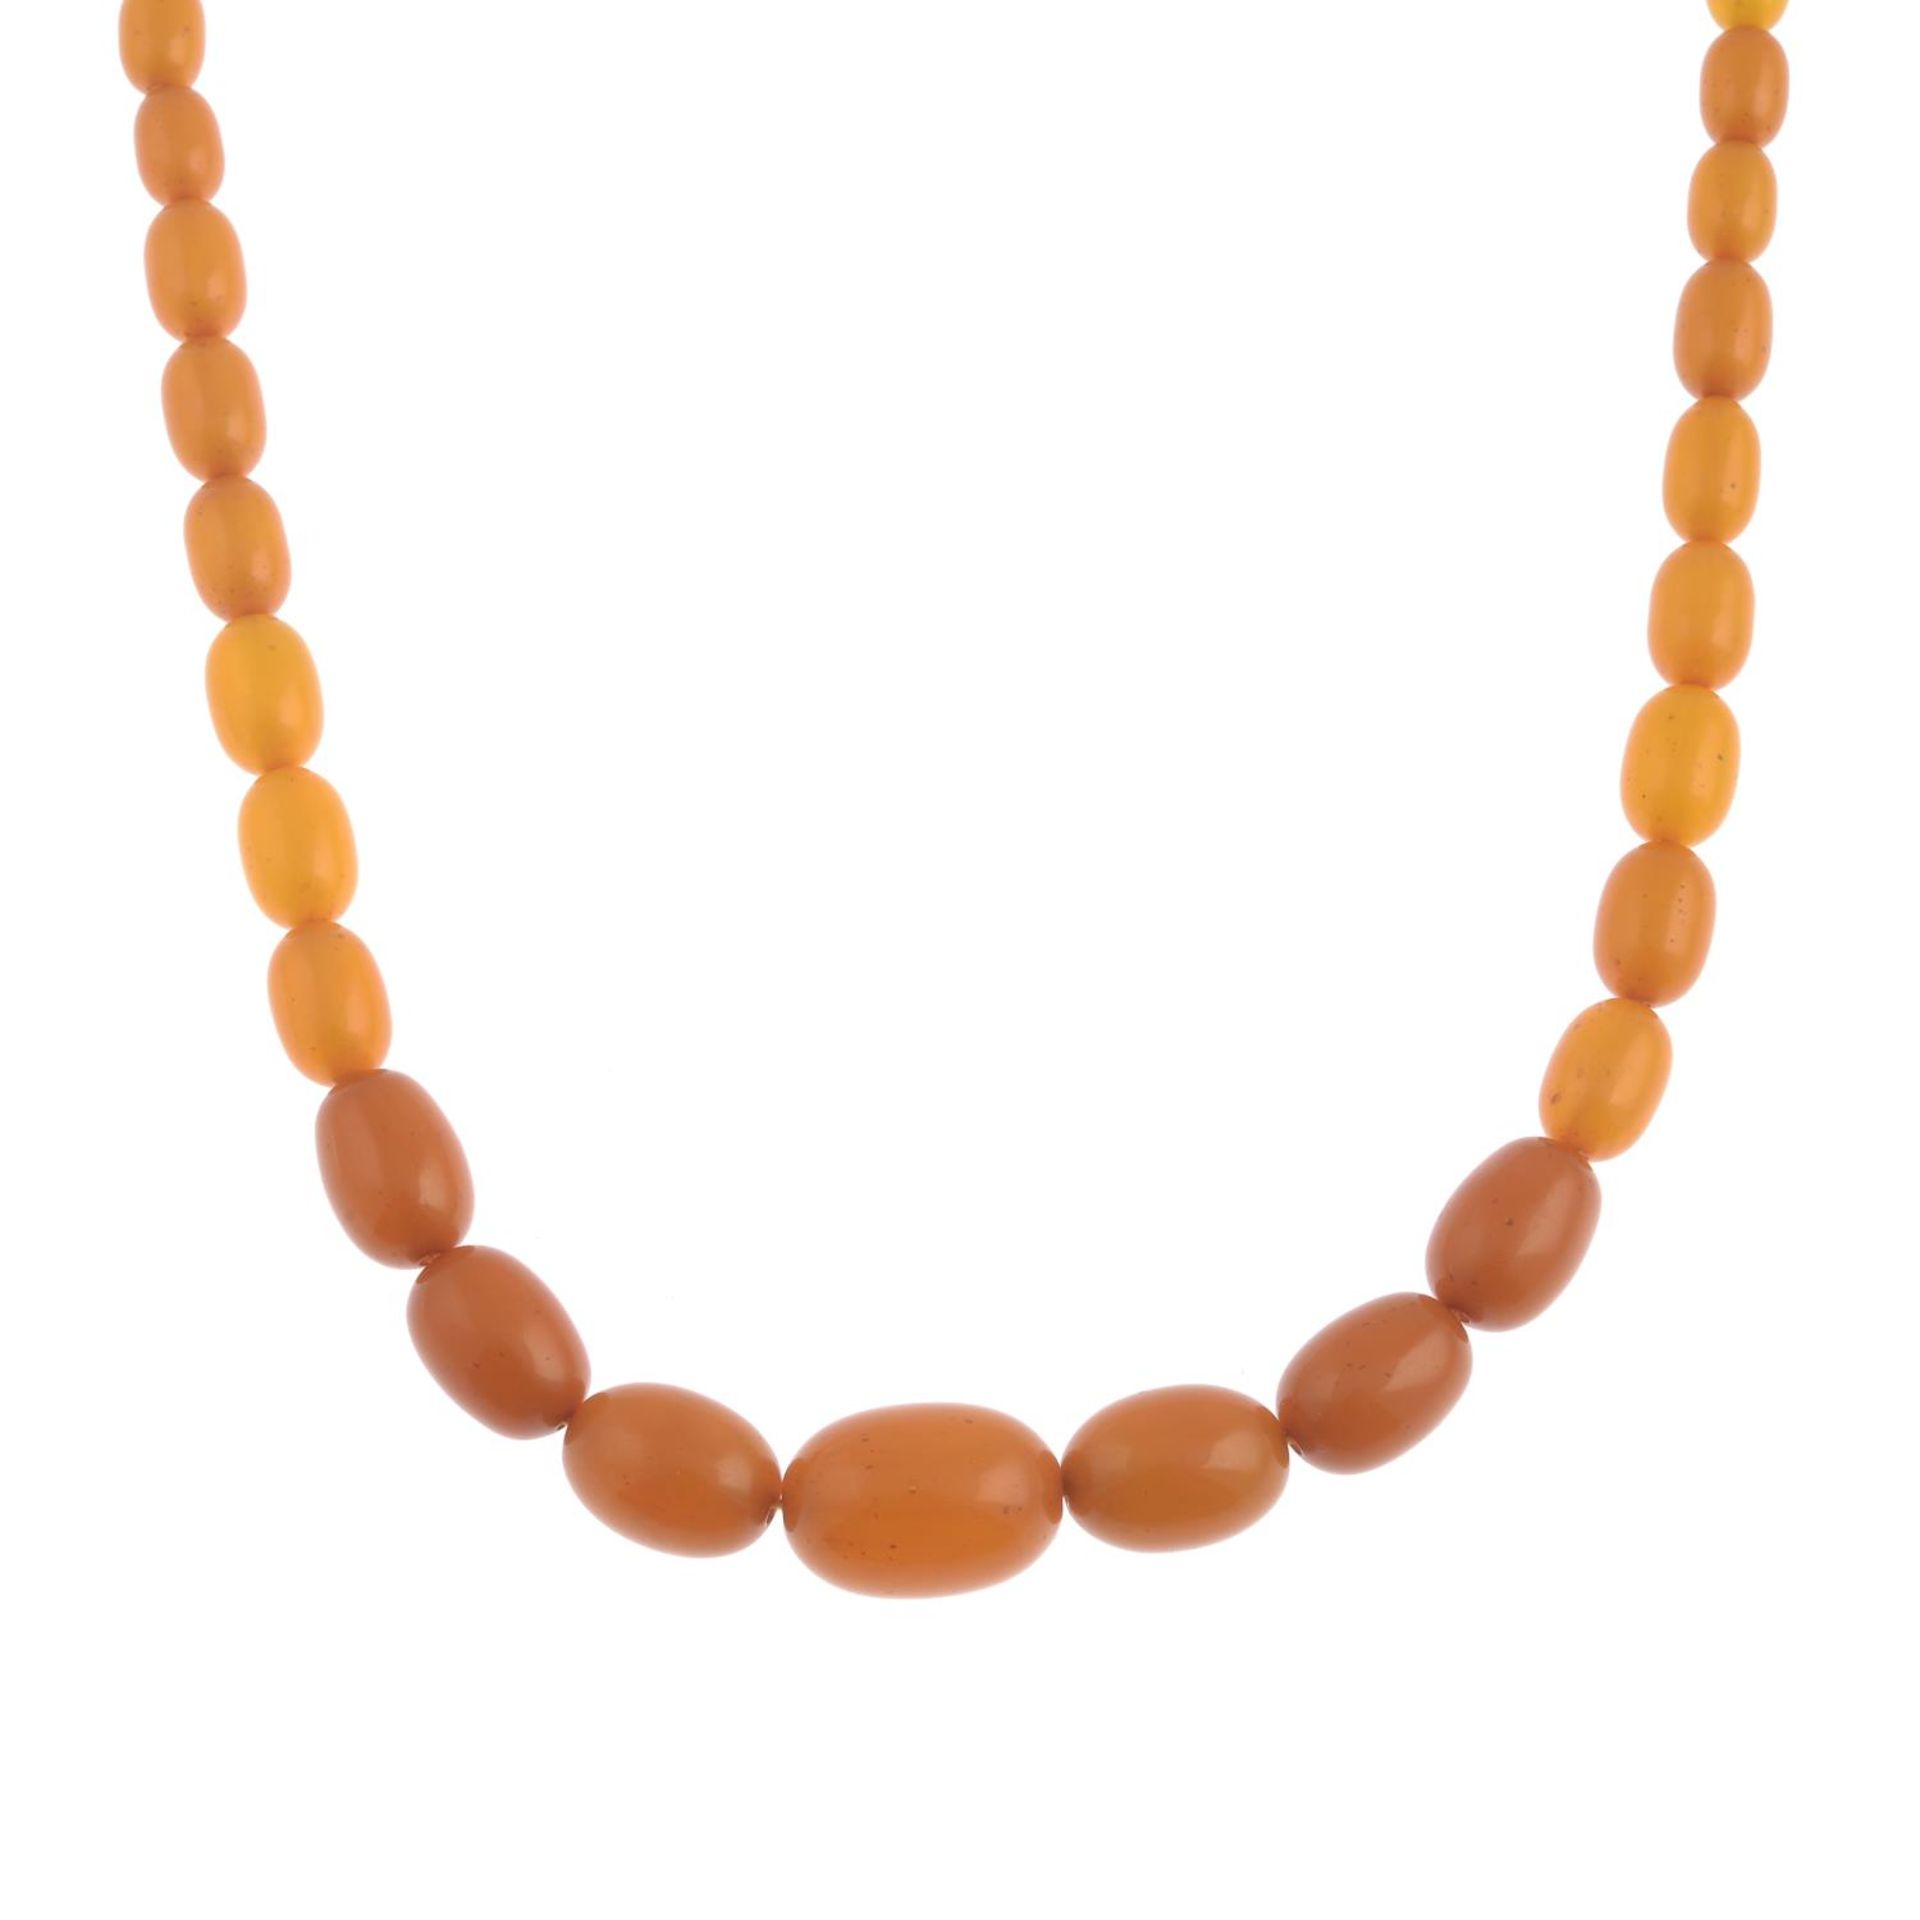 A bakelite bead necklace.Approximate dimensions of beads 20 to 9.5mms.